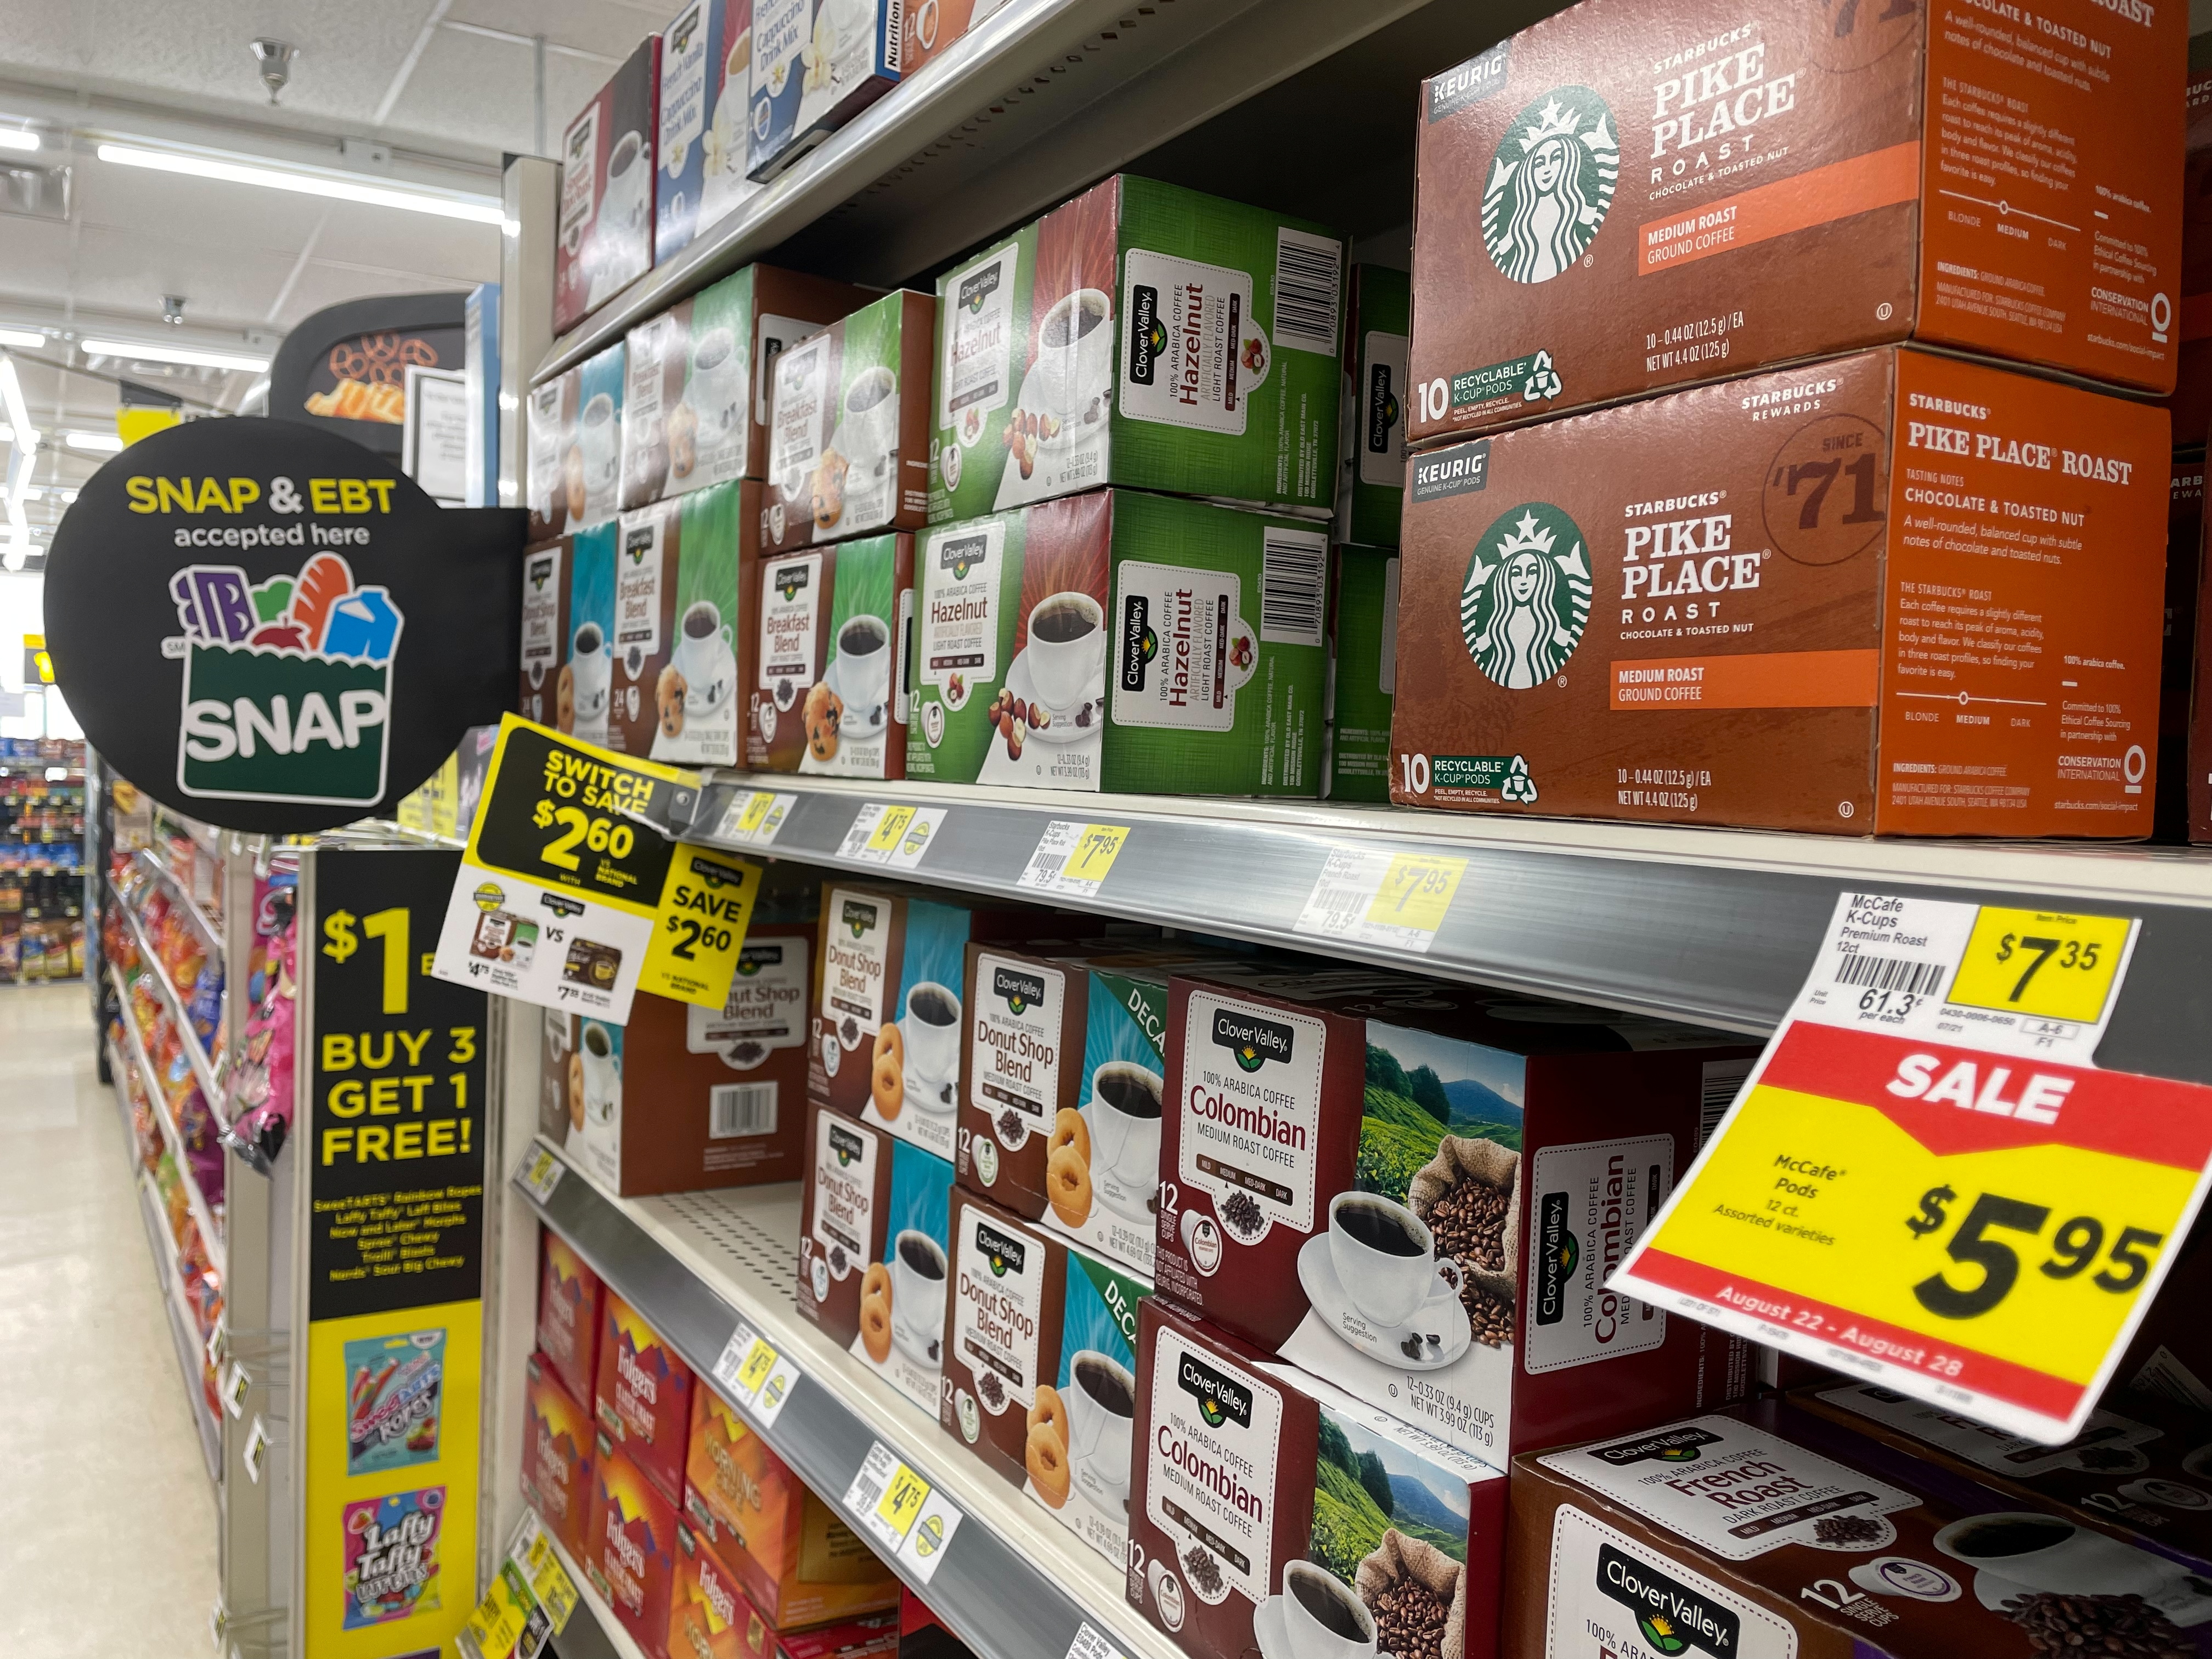 Packs of coffee are seen at a Dollar General store in Norridge, Chicago